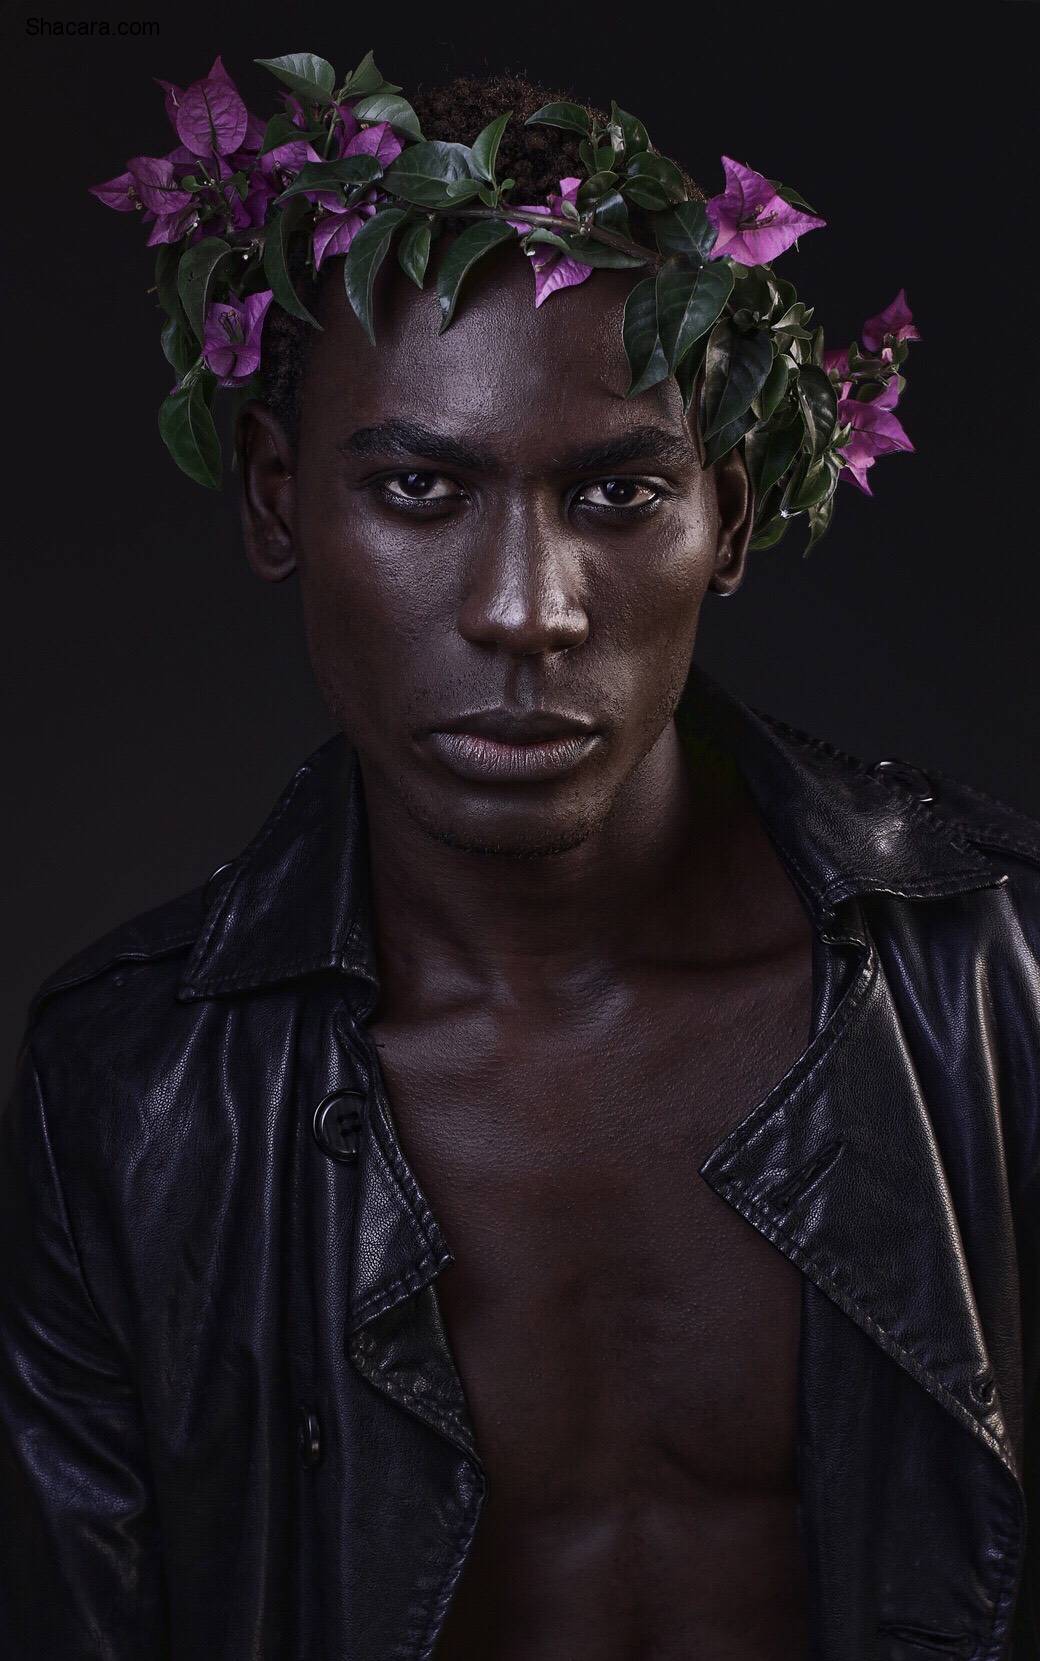 Hot Shots: The Day A Man Wore A Flower Crown; Shoot By William Nsai